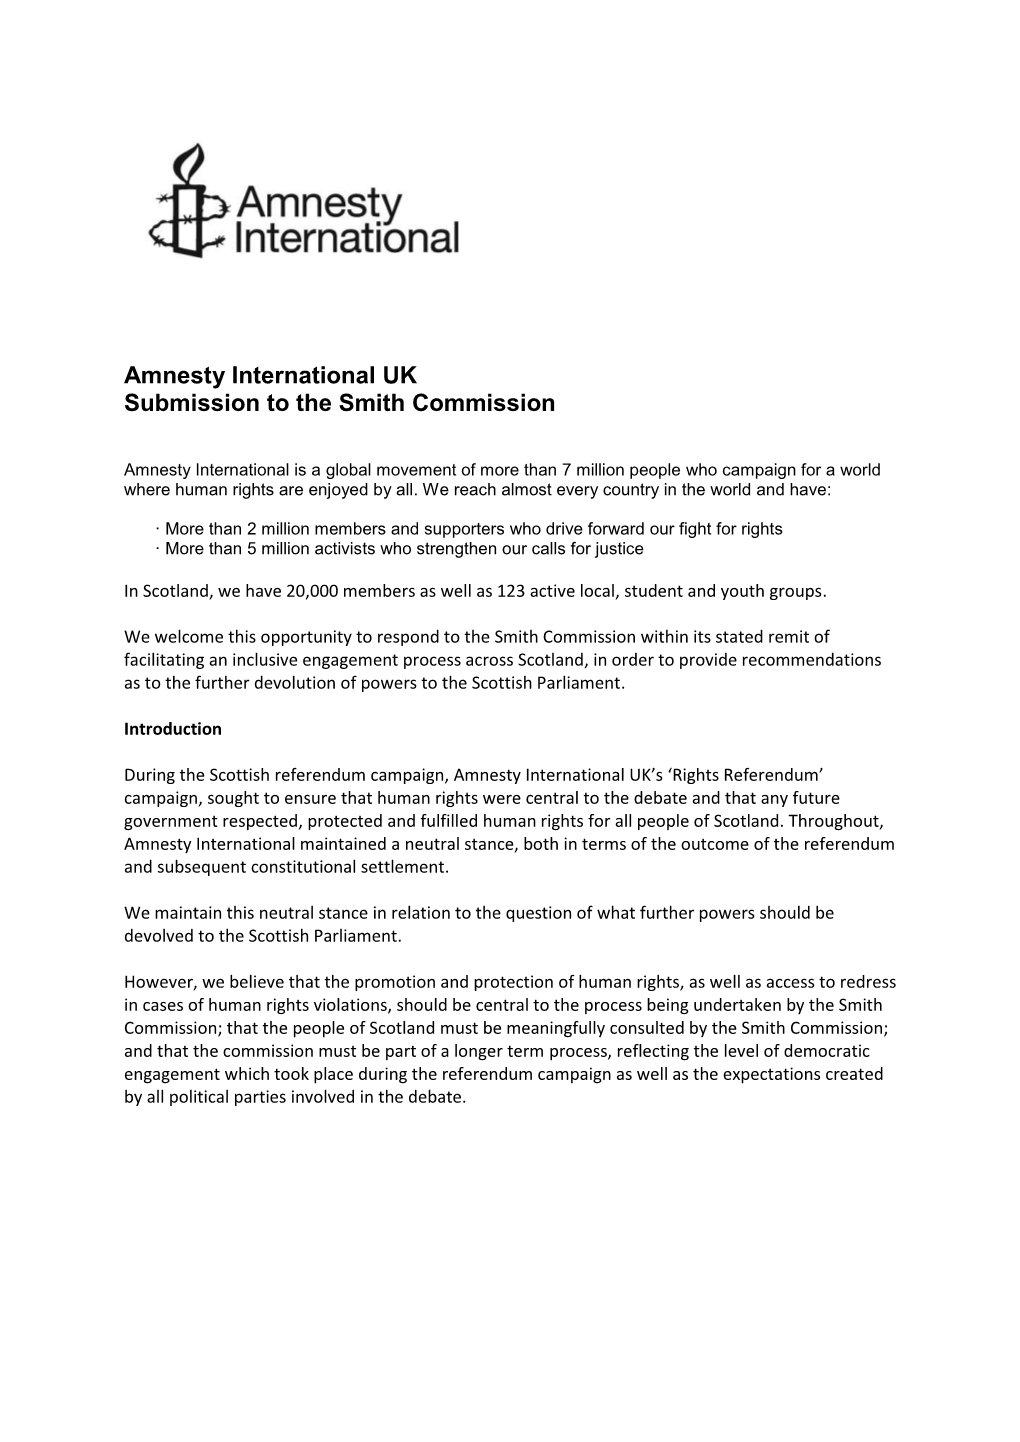 Amnesty International UK Submission to the Smith Commission